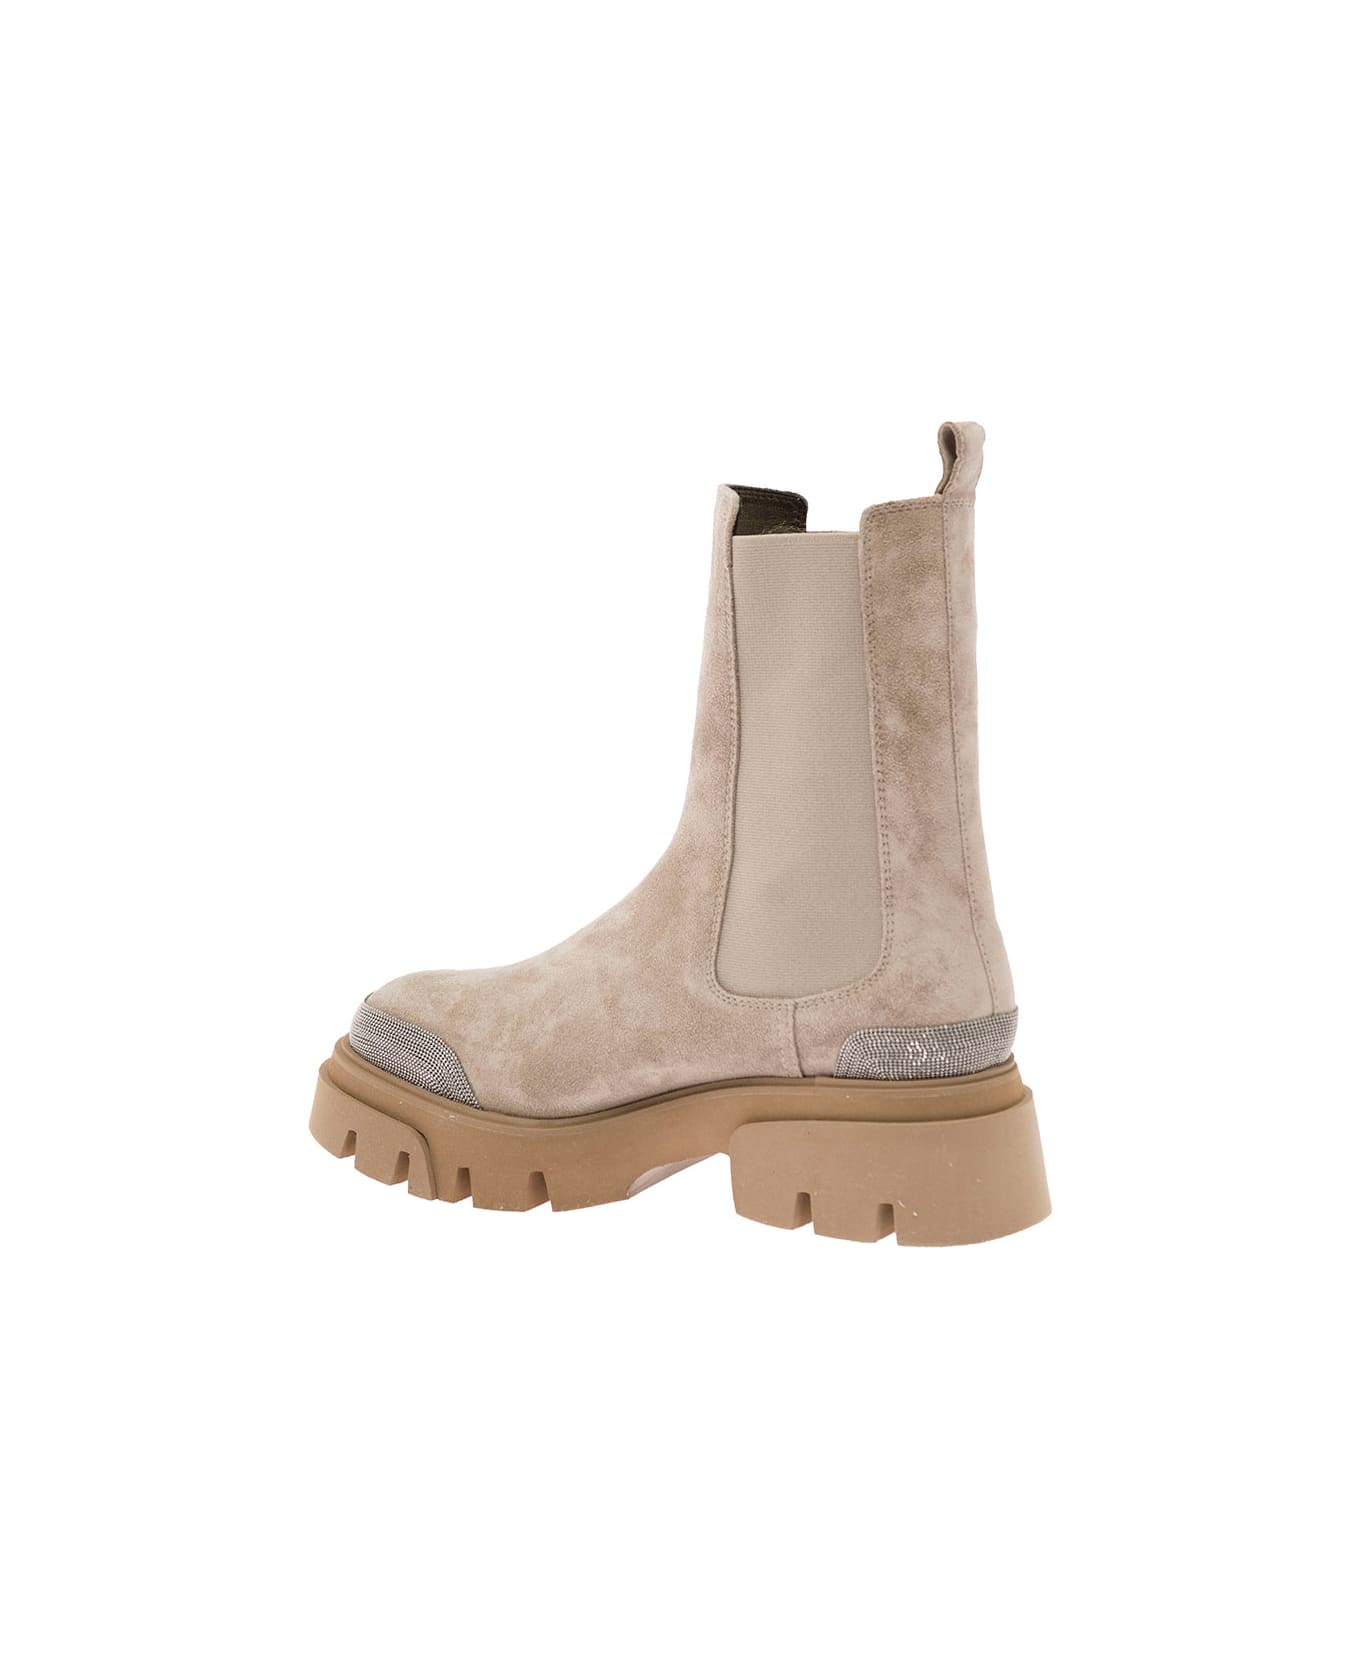 Brunello Cucinelli Taupe Ankle Boots In Suede With Monile Embellishment Brunello Cucinelli Woman - Beige